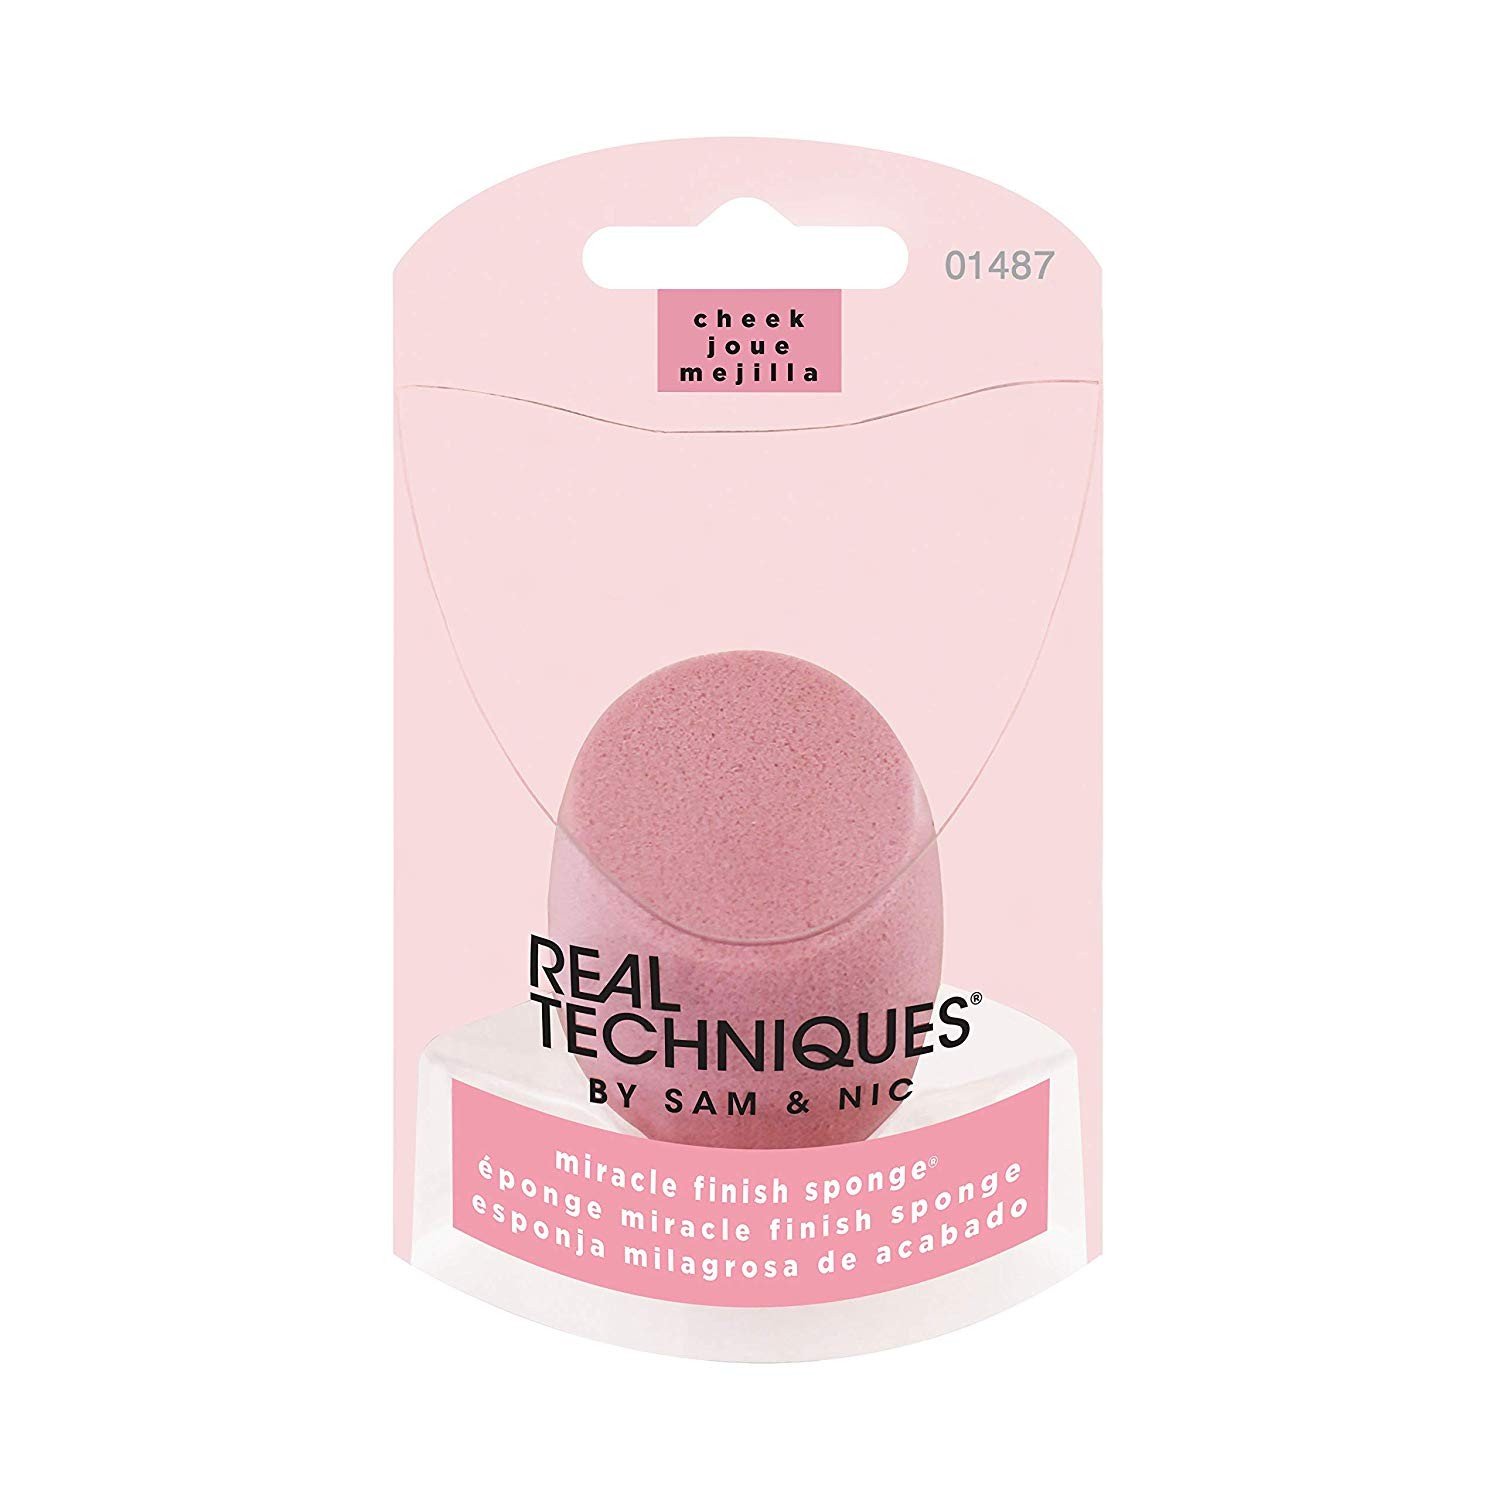 REAL TECHNIQUES MIRACLE FINISH SPONGE